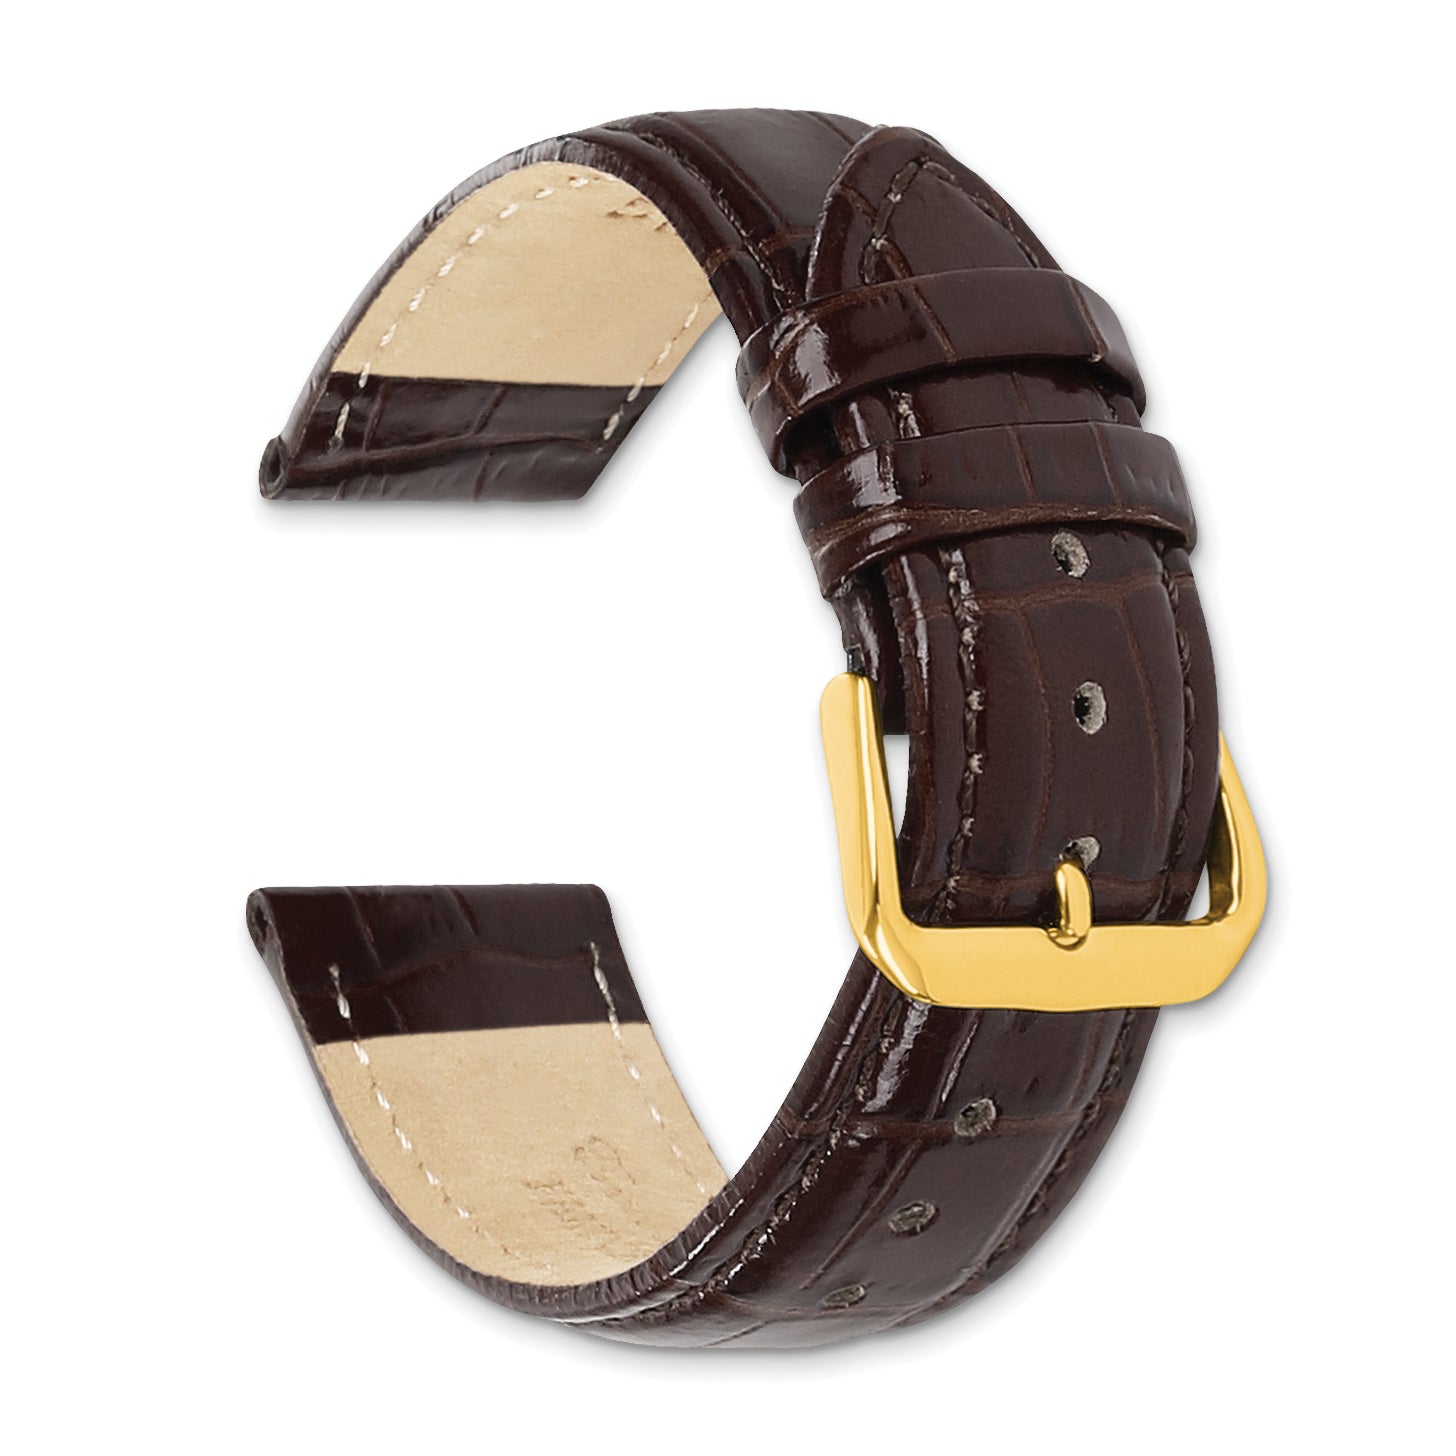 12mm Dark Brown Crocodile Grain Chronograph Leather with Gold-tone Buckle 6.75 inch Watch Band